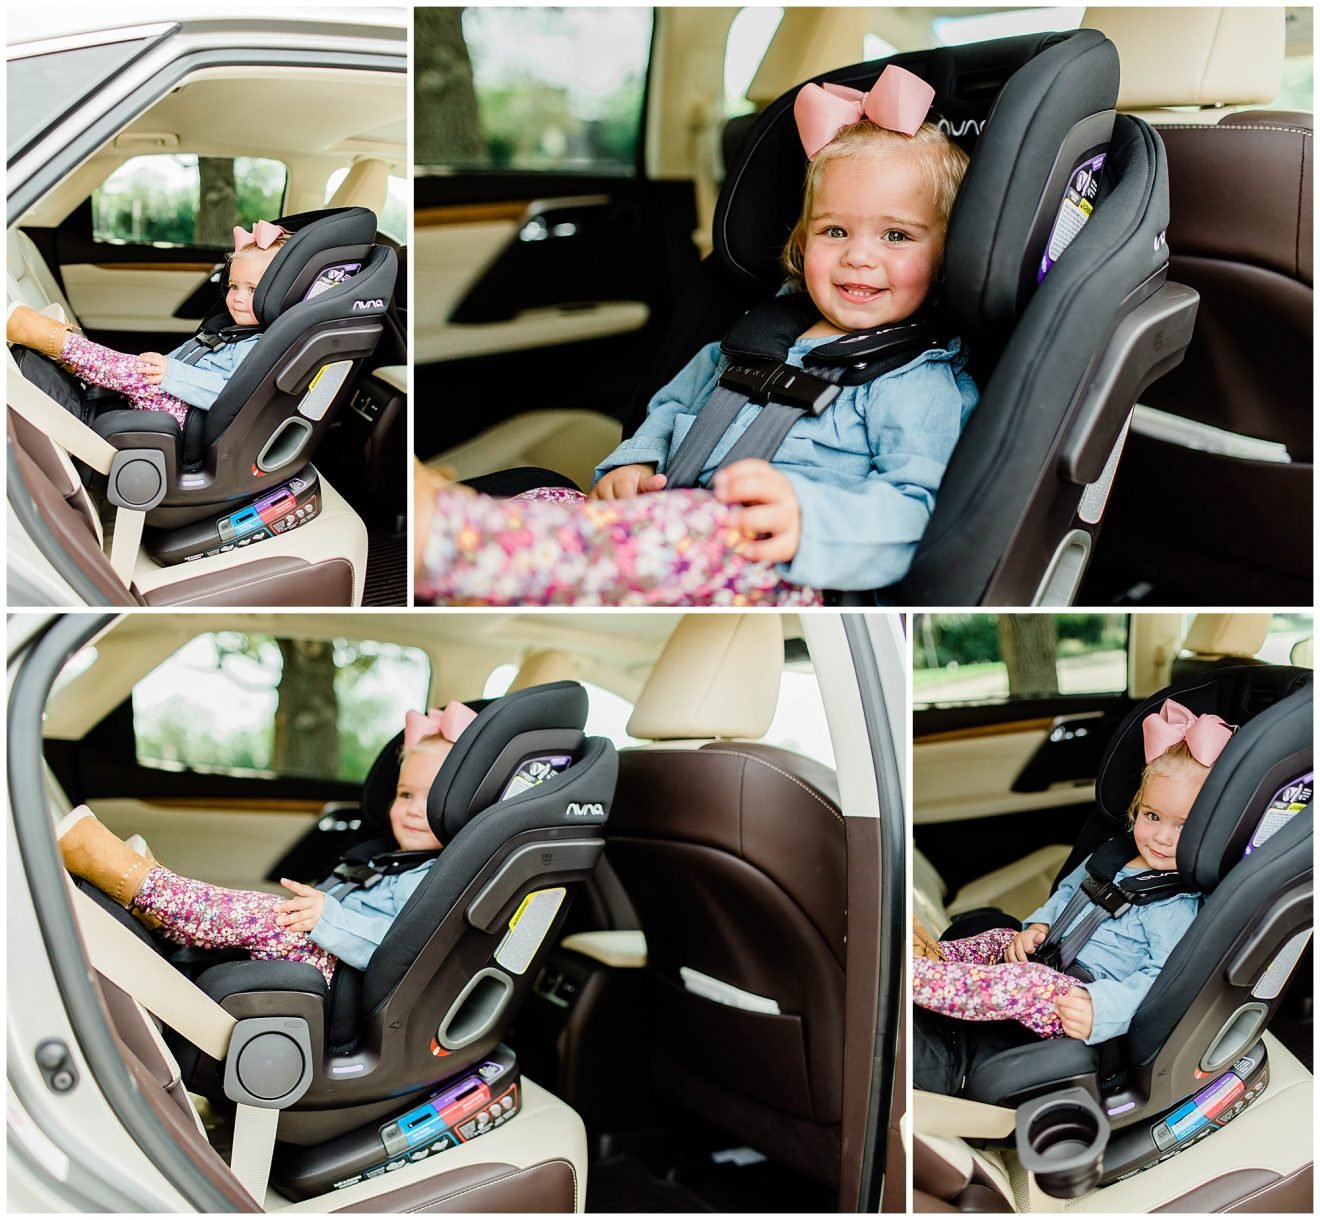 Toddler sitting in the NUNA all-in-one car seat called the EXEC.